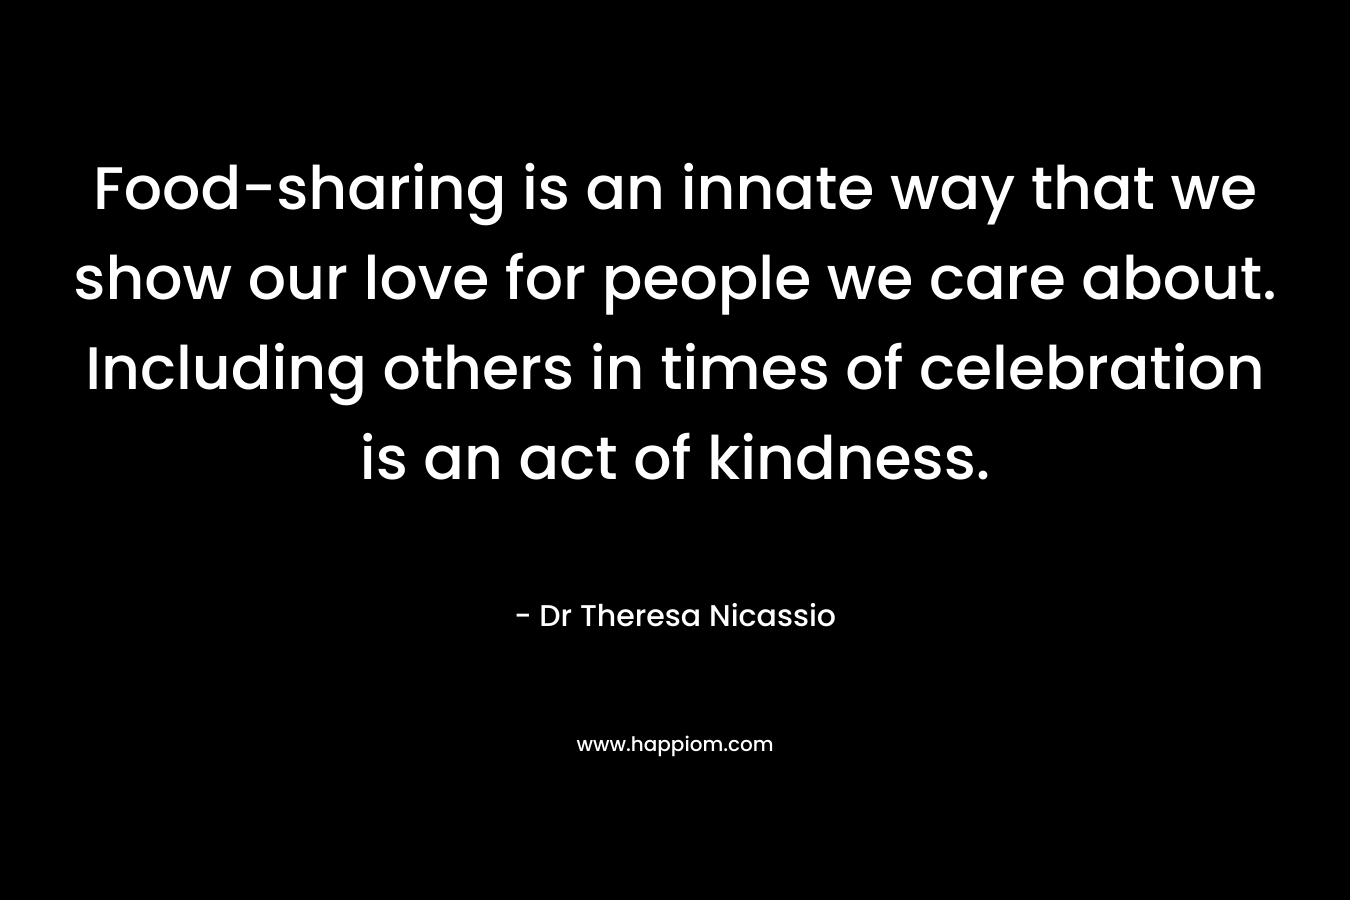 Food-sharing is an innate way that we show our love for people we care about. Including others in times of celebration is an act of kindness.